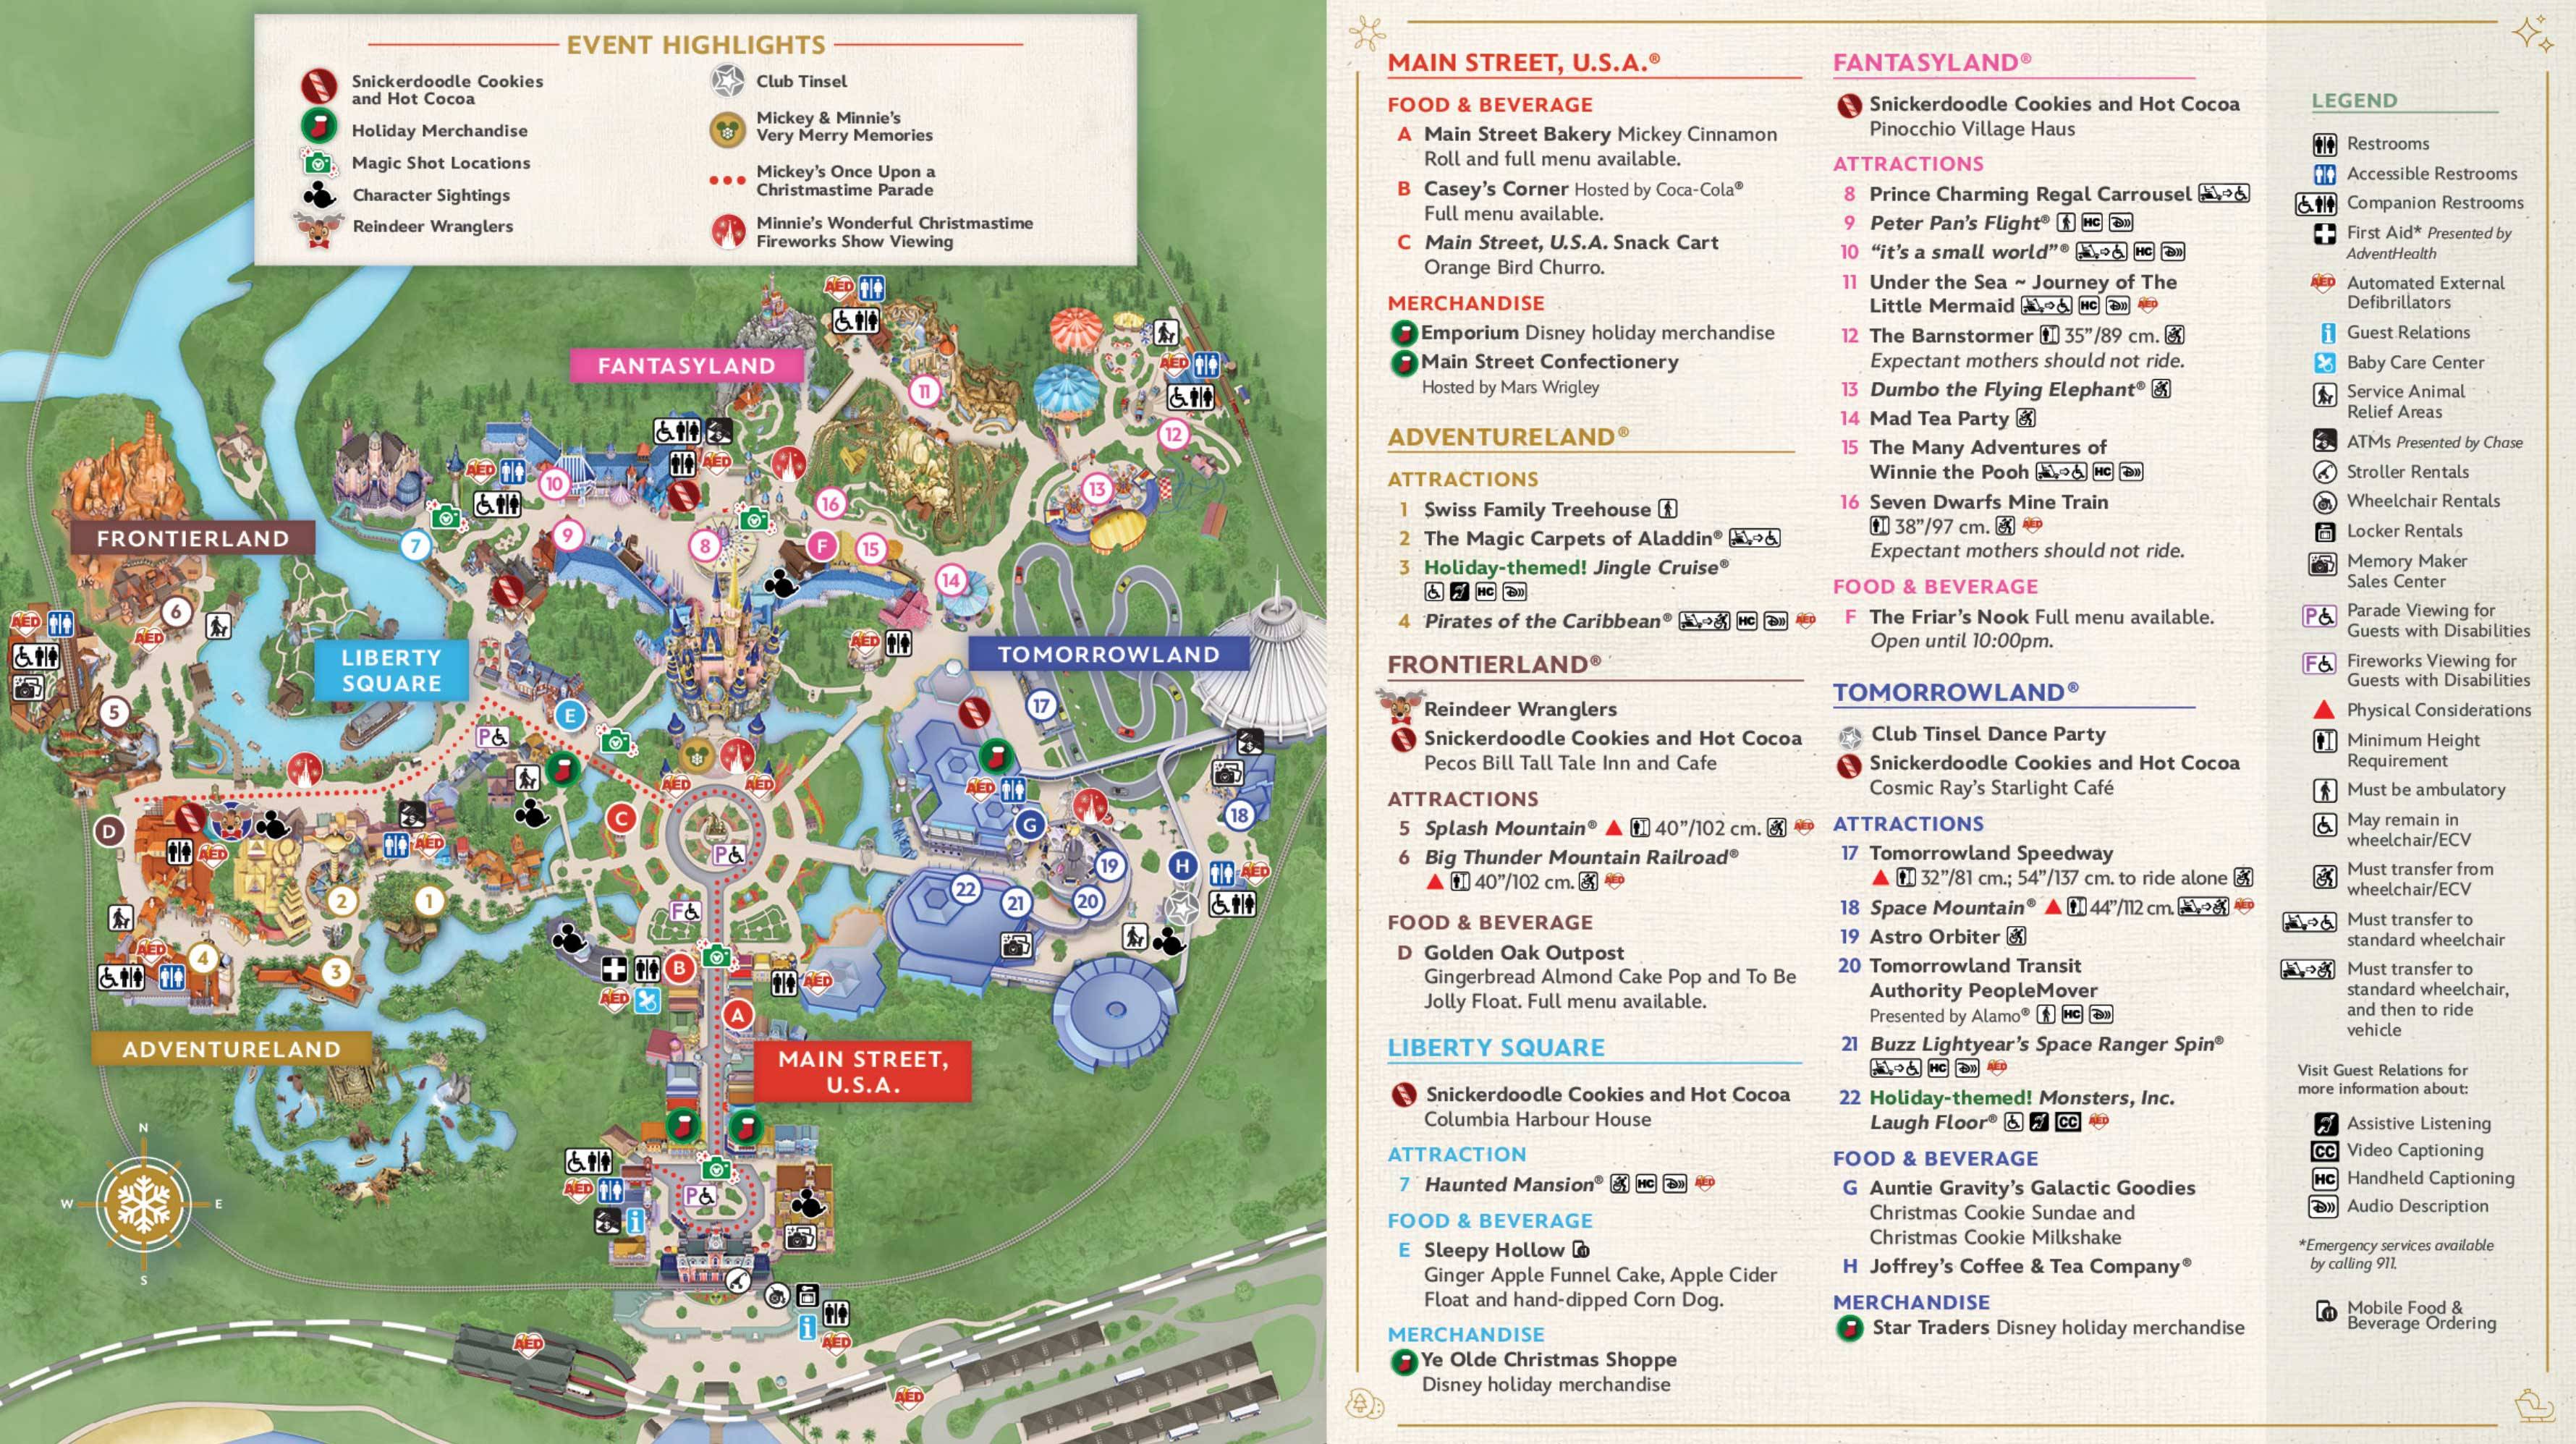 'Disney Very Merriest After Hours' guide map for the Magic Kingdom ticketed event